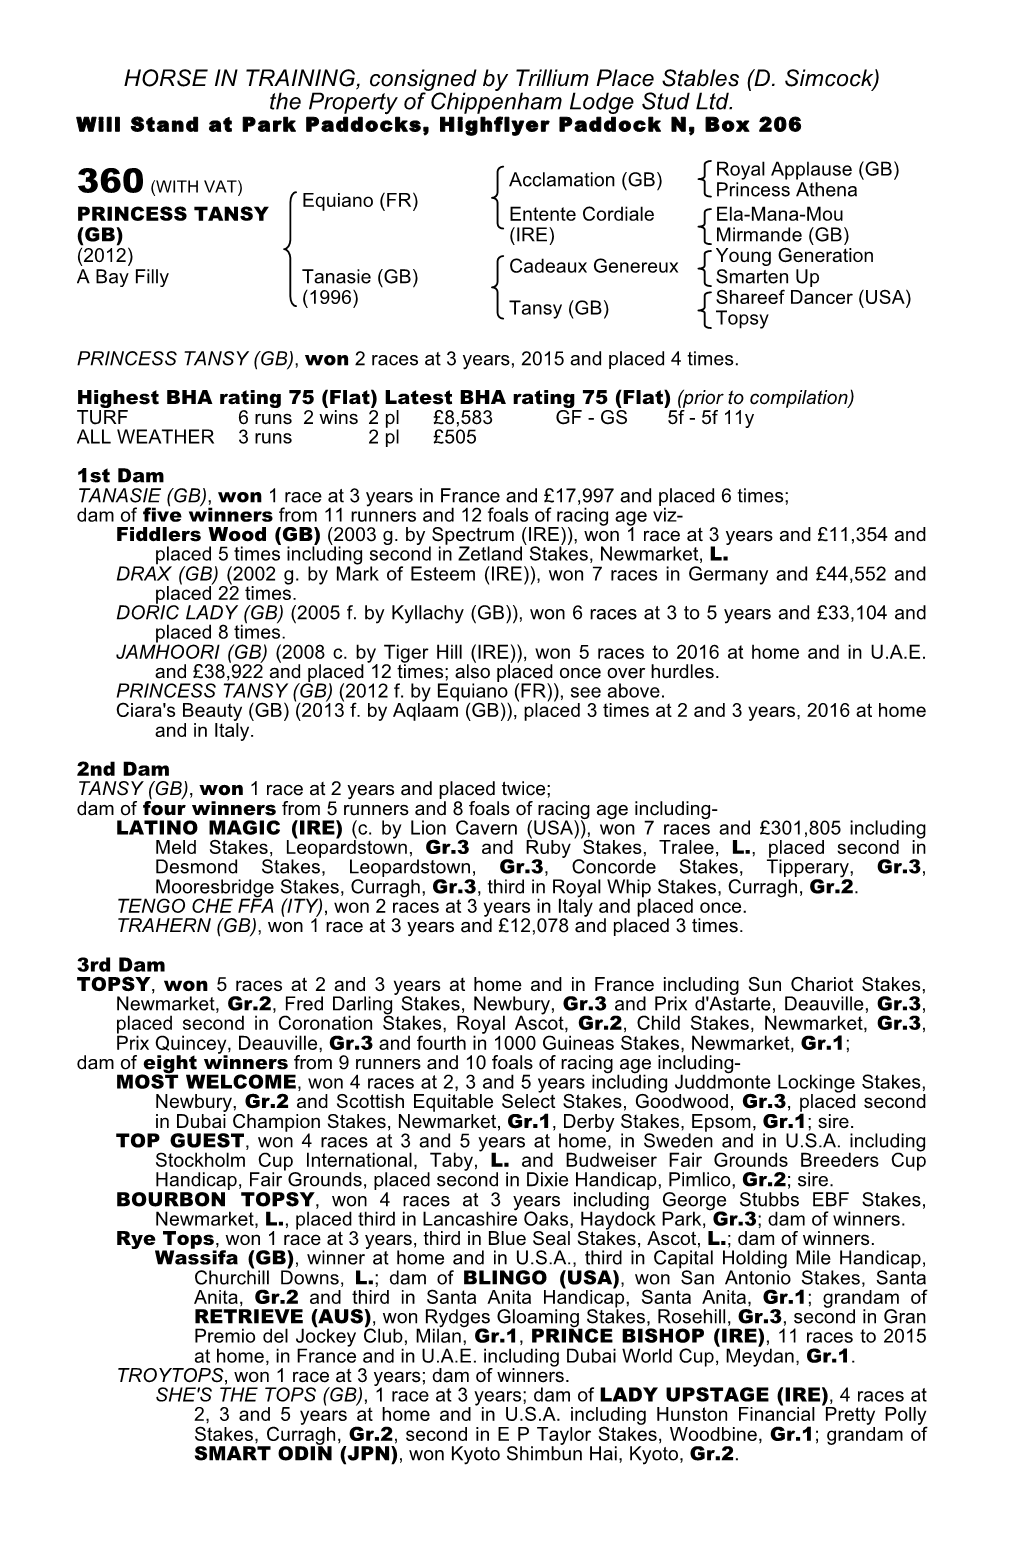 HORSE in TRAINING, Consigned by Trillium Place Stables (D. Simcock) the Property of Chippenham Lodge Stud Ltd